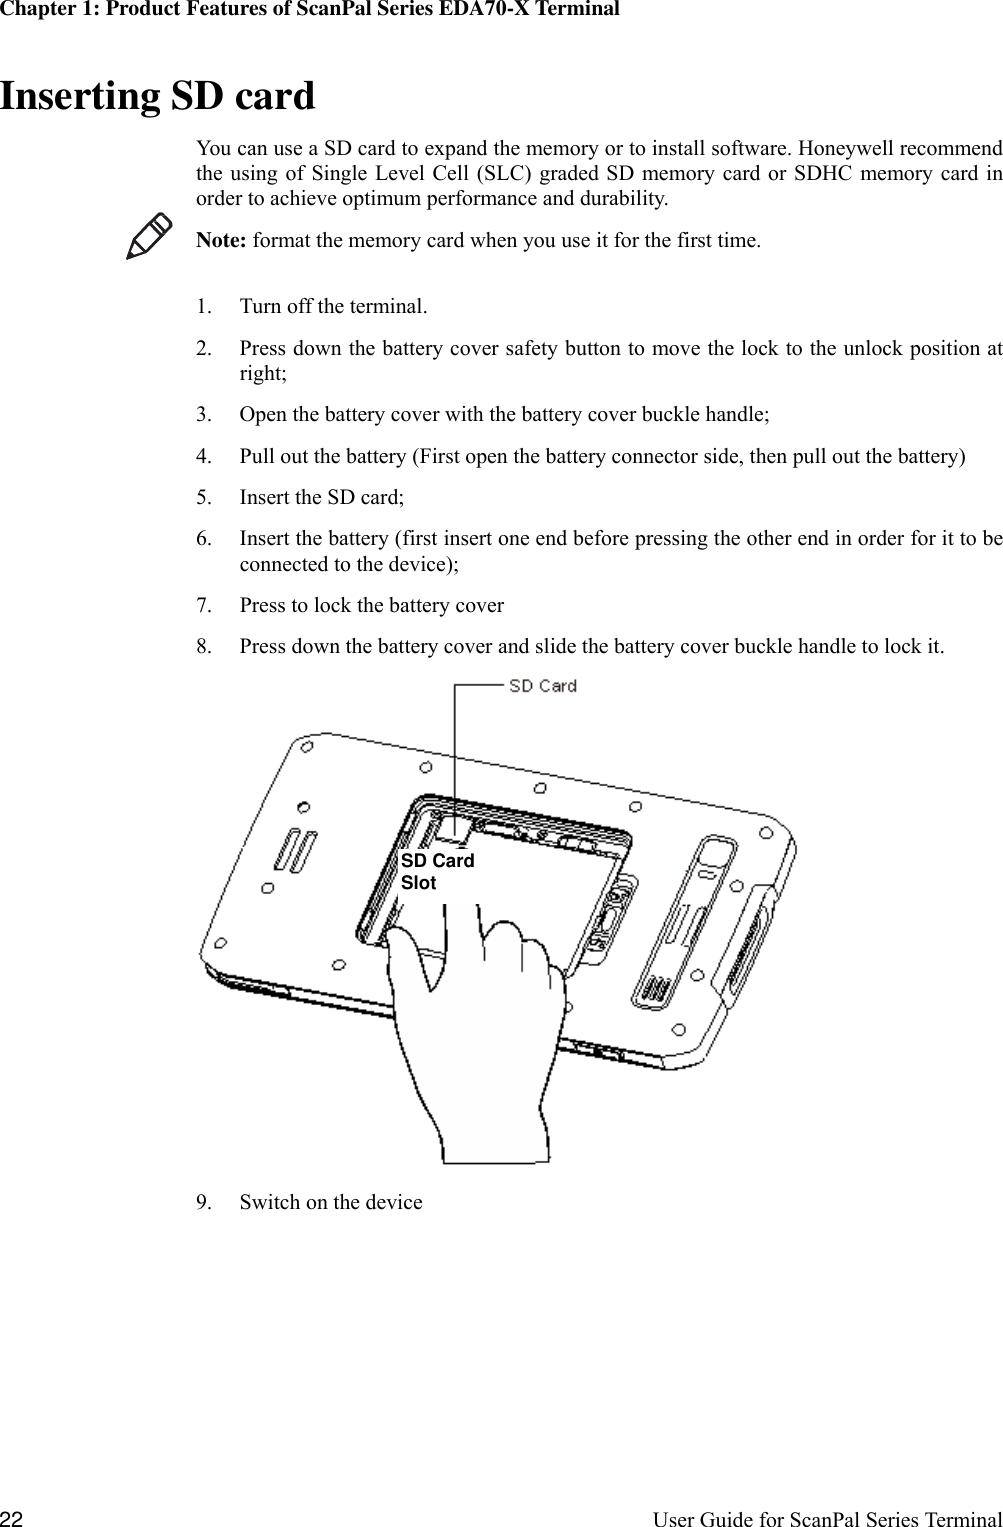 Page 28 of Honeywell EDA703 Tablet User Manual P1